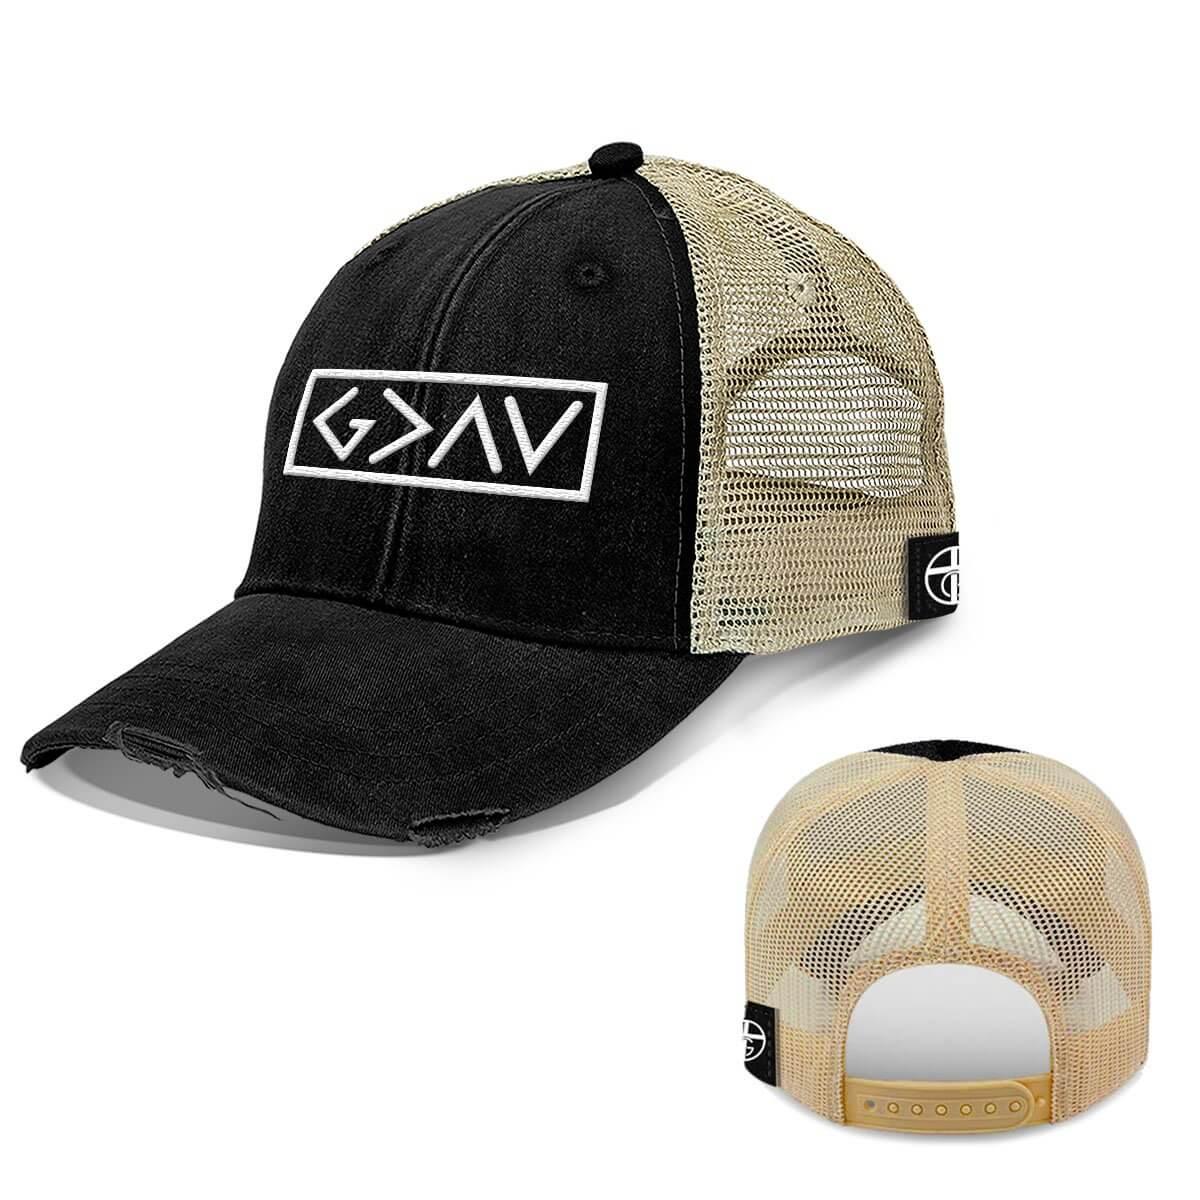 God is Greater Than the Highs and Lows Hats Trucker Hats - Our True God